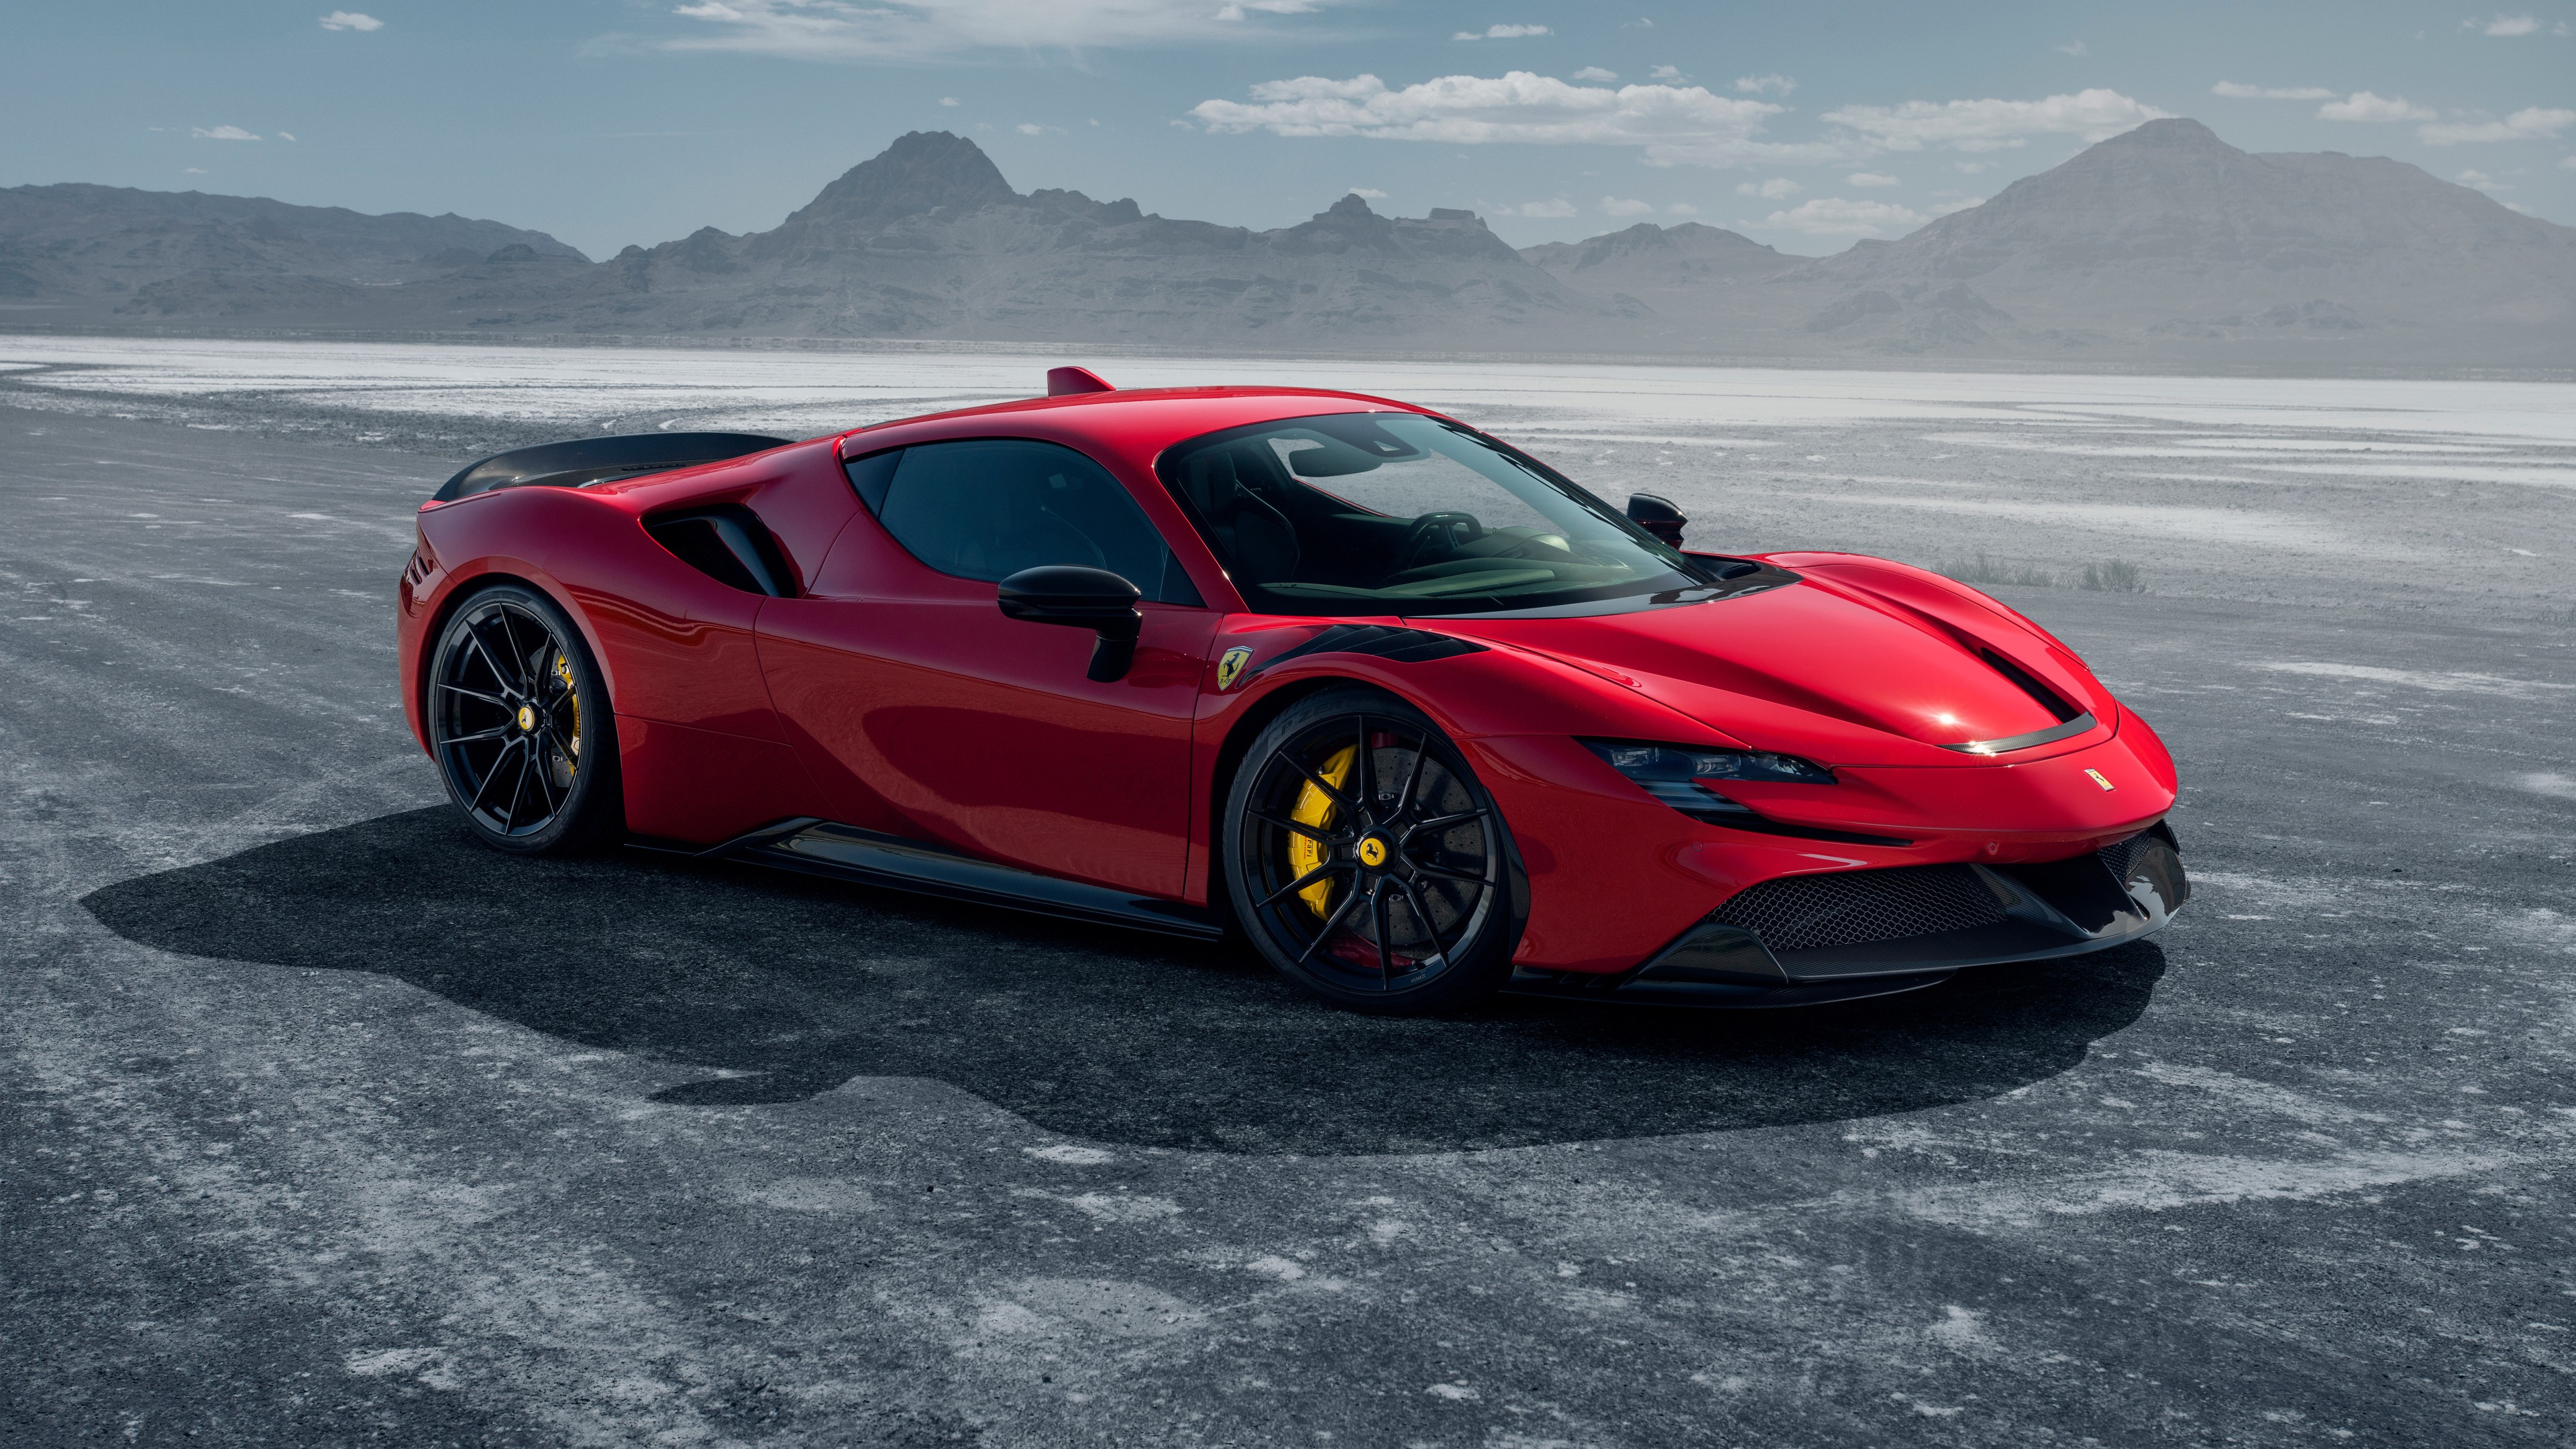 Red Ferrari Sf90 Stradale Wallpaper Hd Wallpapers Images and Photos